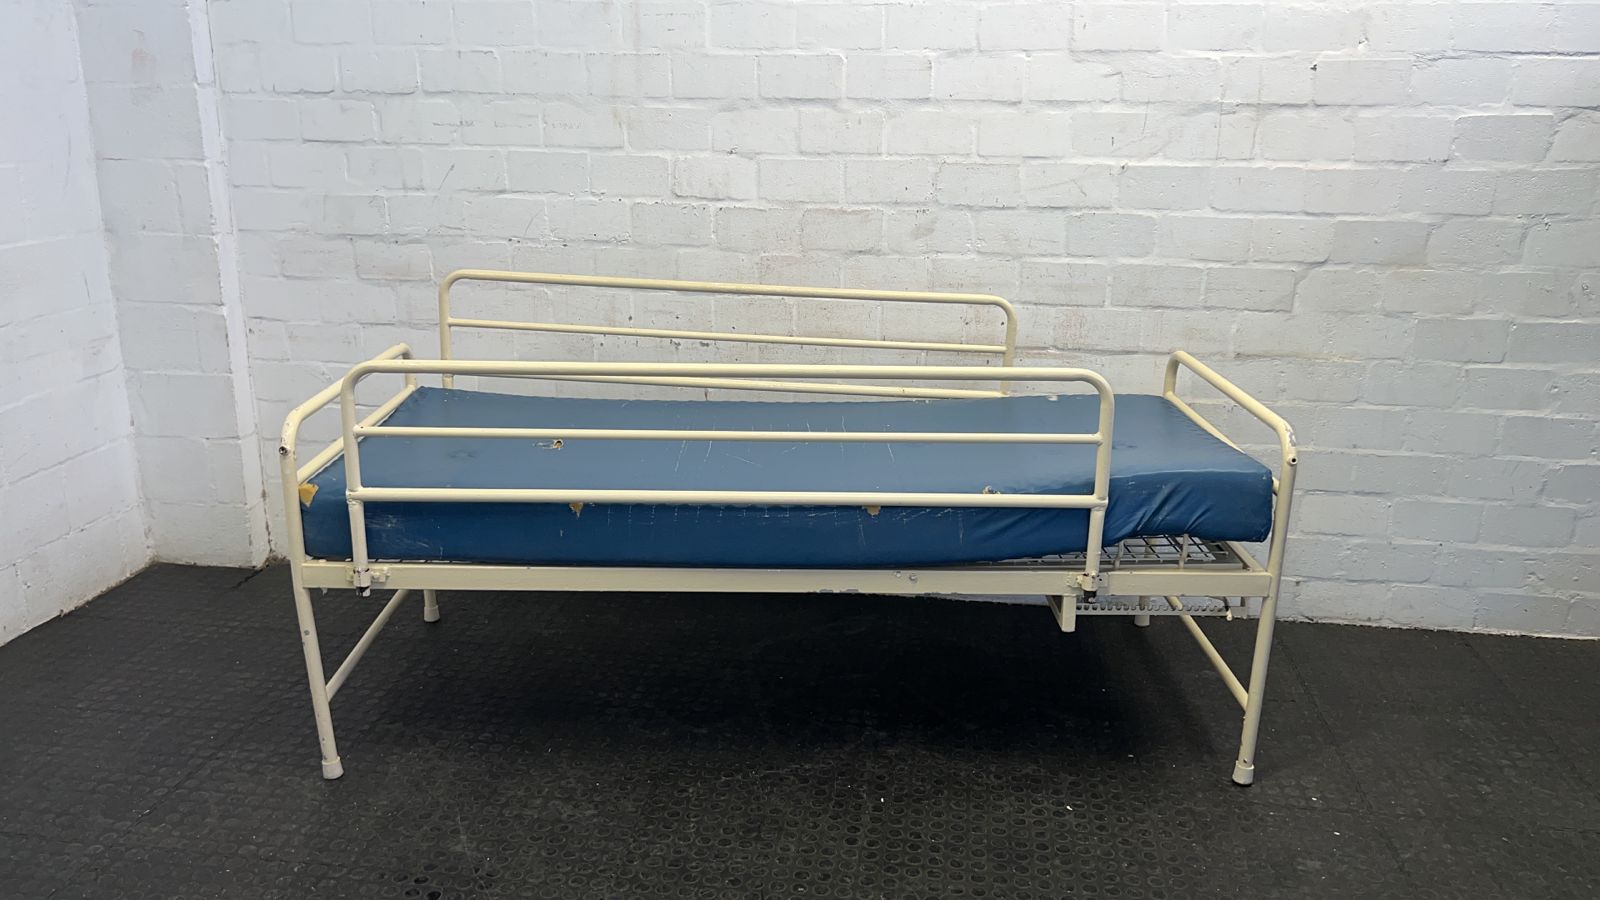 Adjustable Hospital Single Bed with Blue Mattress and Cot Sides (Holes in Mattress Cover )